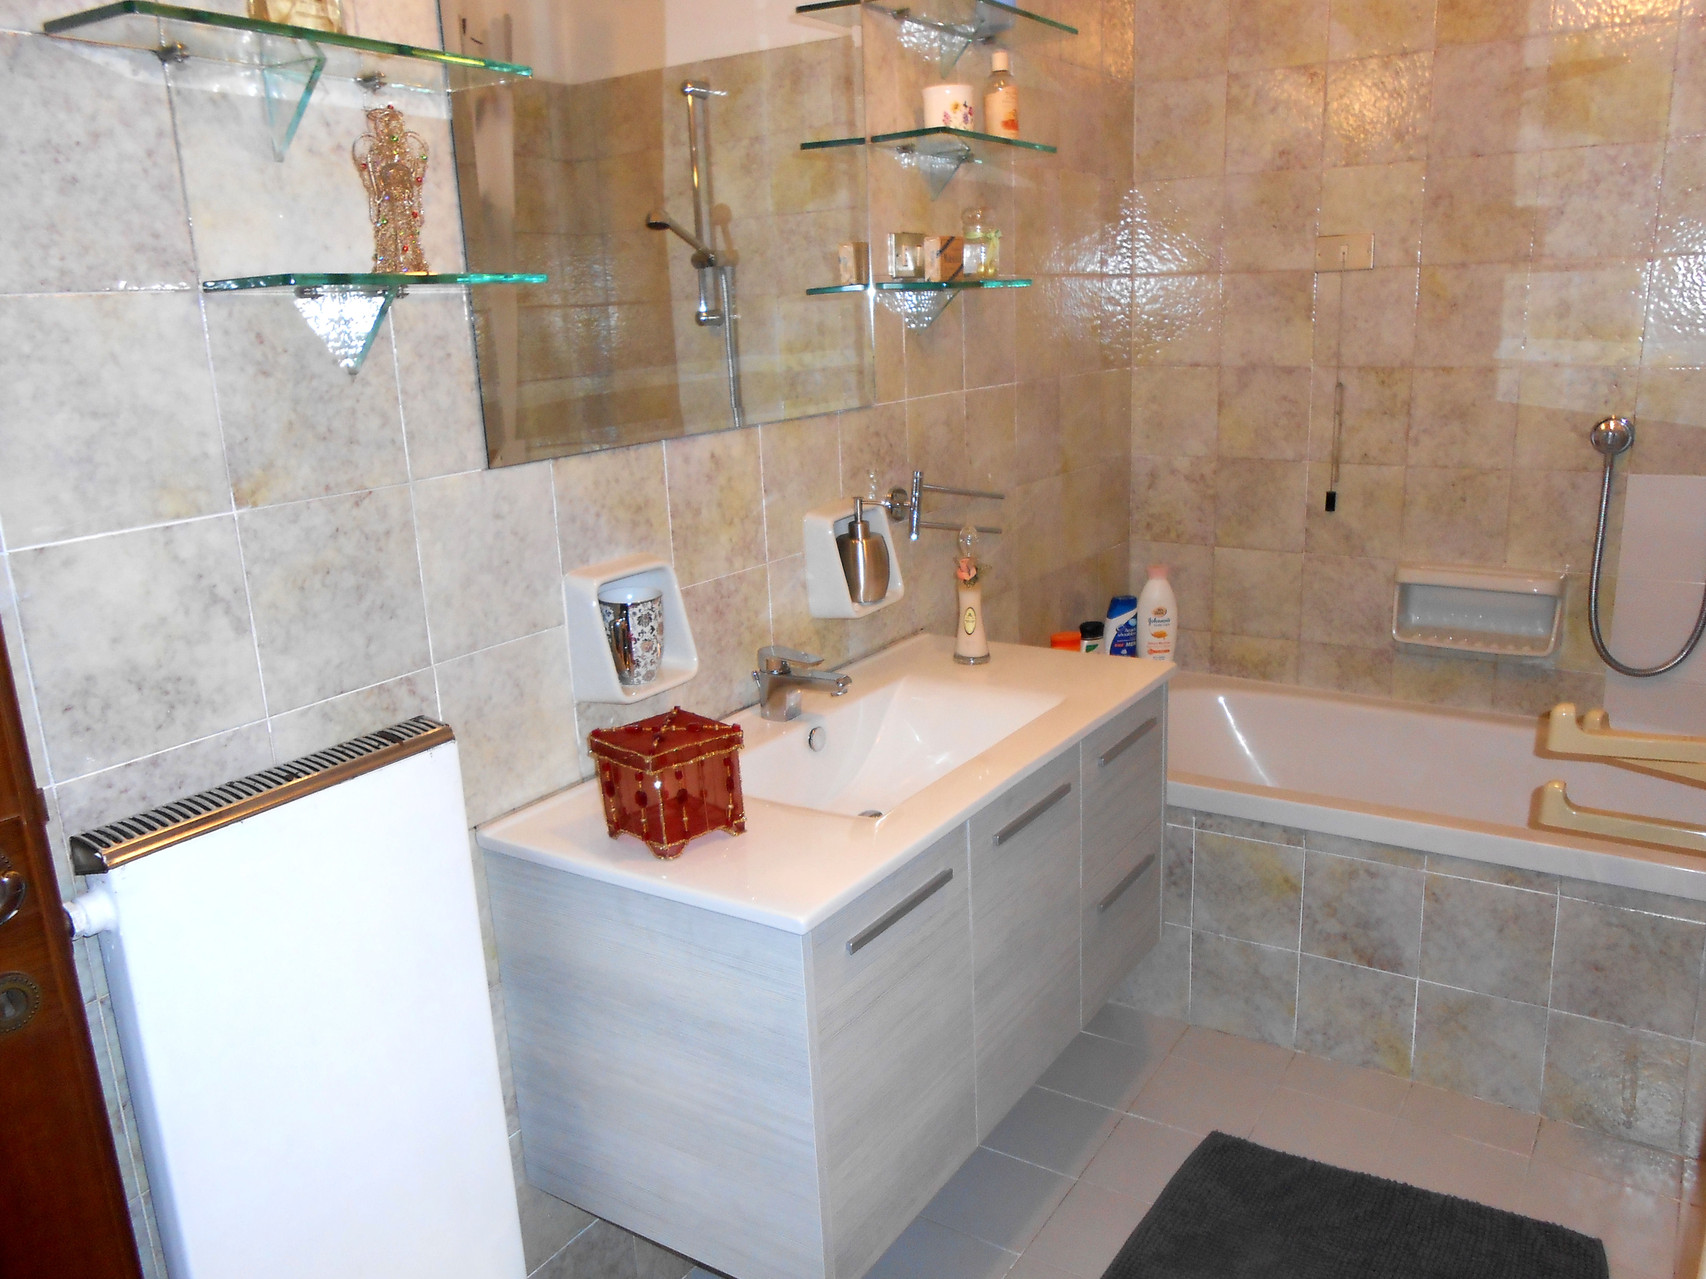 The 3 bathrooms are equipped with everything you need (soap, shampoo, towels, hair dryer, ..) as the bathroom of your home. 